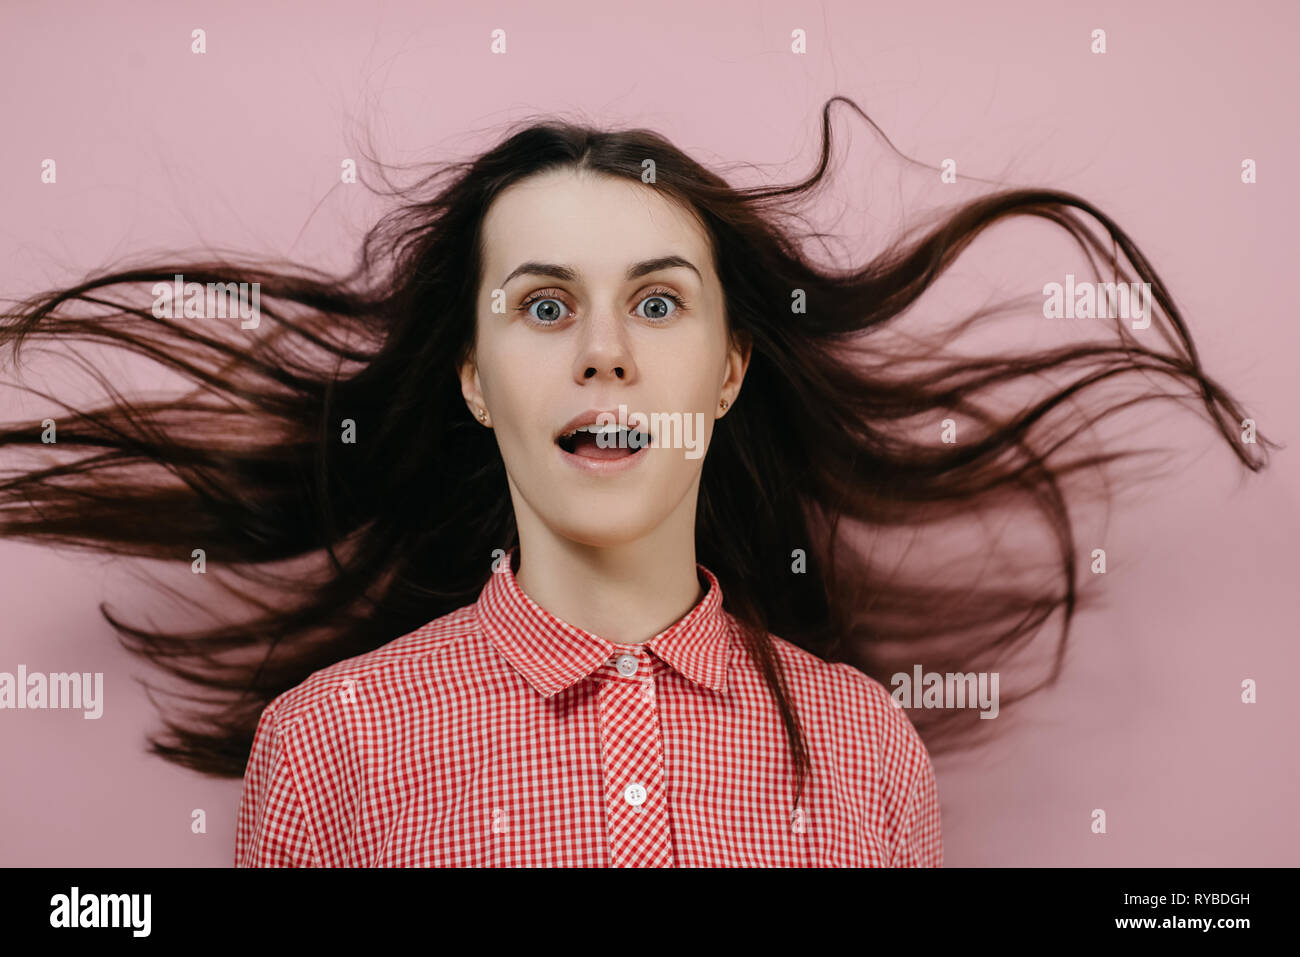 Shocked young girl with flying hair in panic looks with surprised expression, wears red shirt, opens mouth with stupefaction, isolated on pink wall. Stock Photo